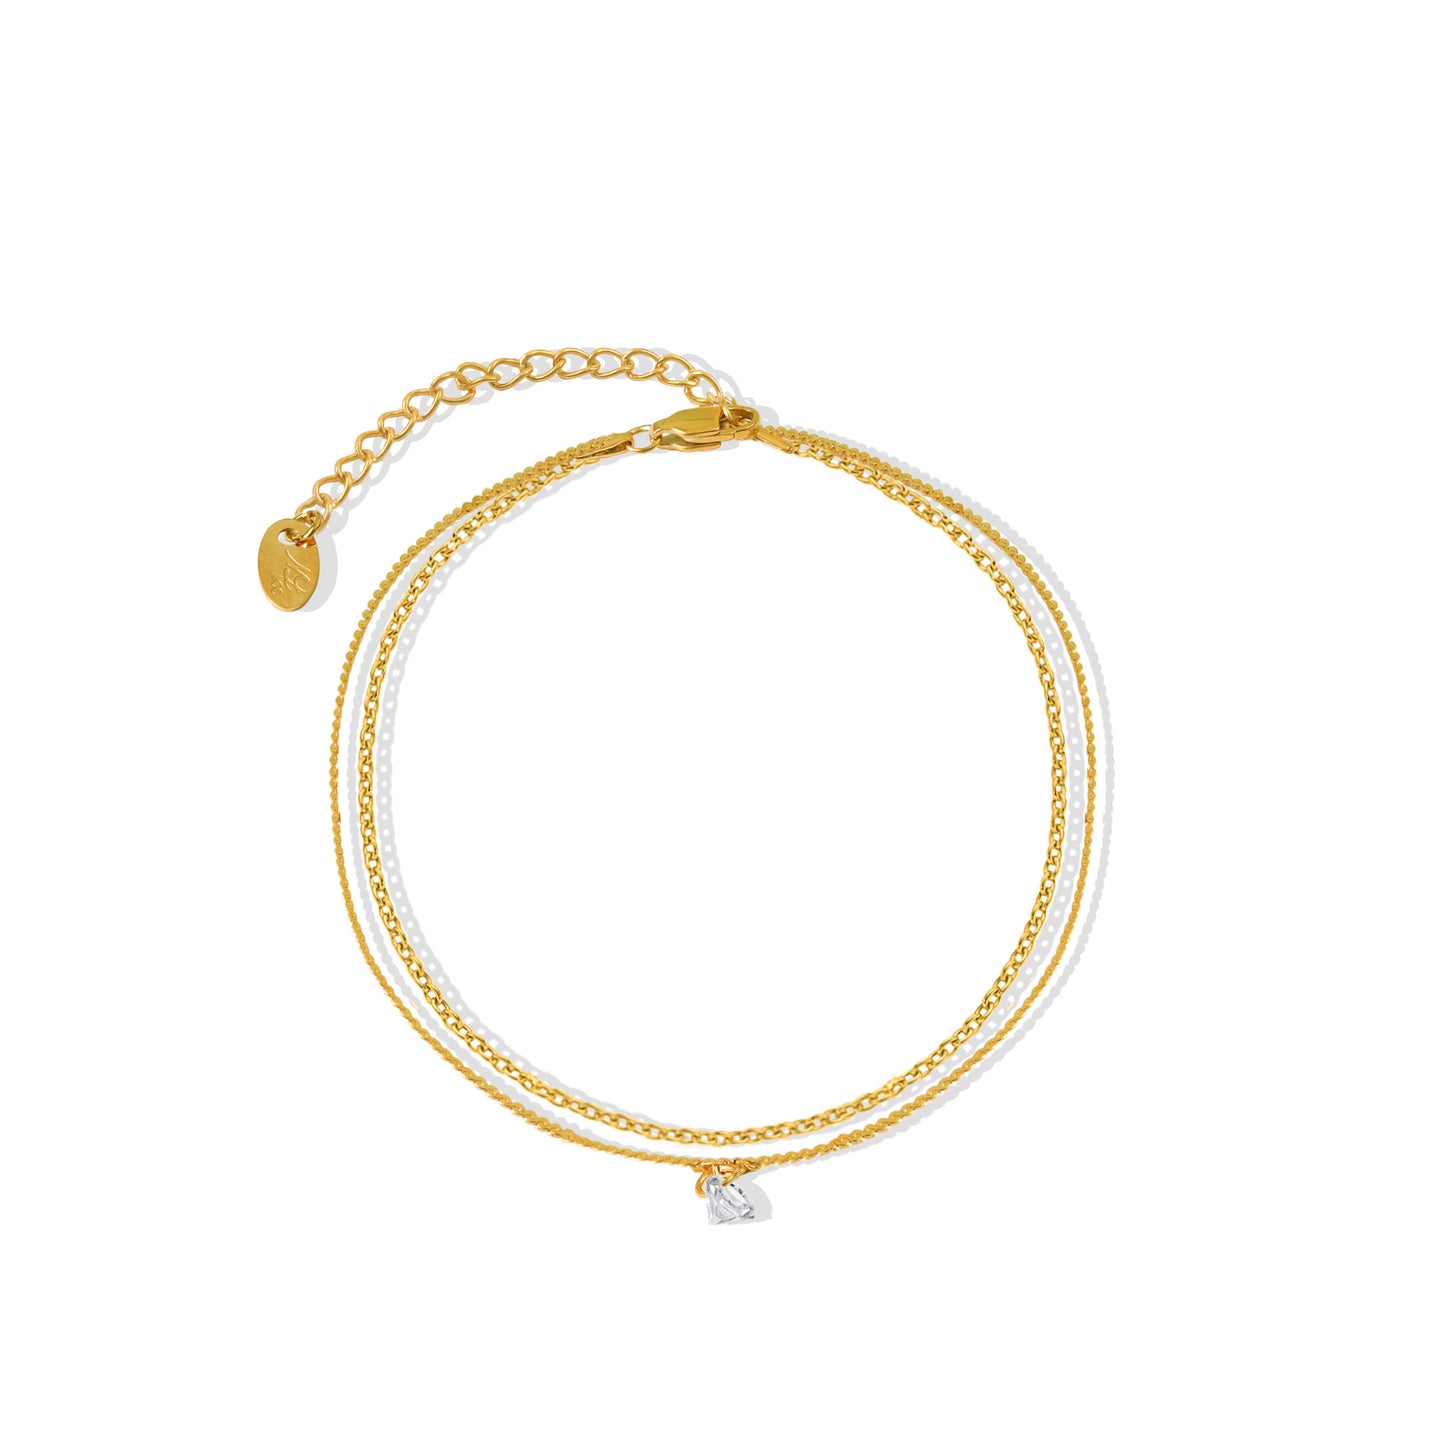 The Stella Double Chain Anklet